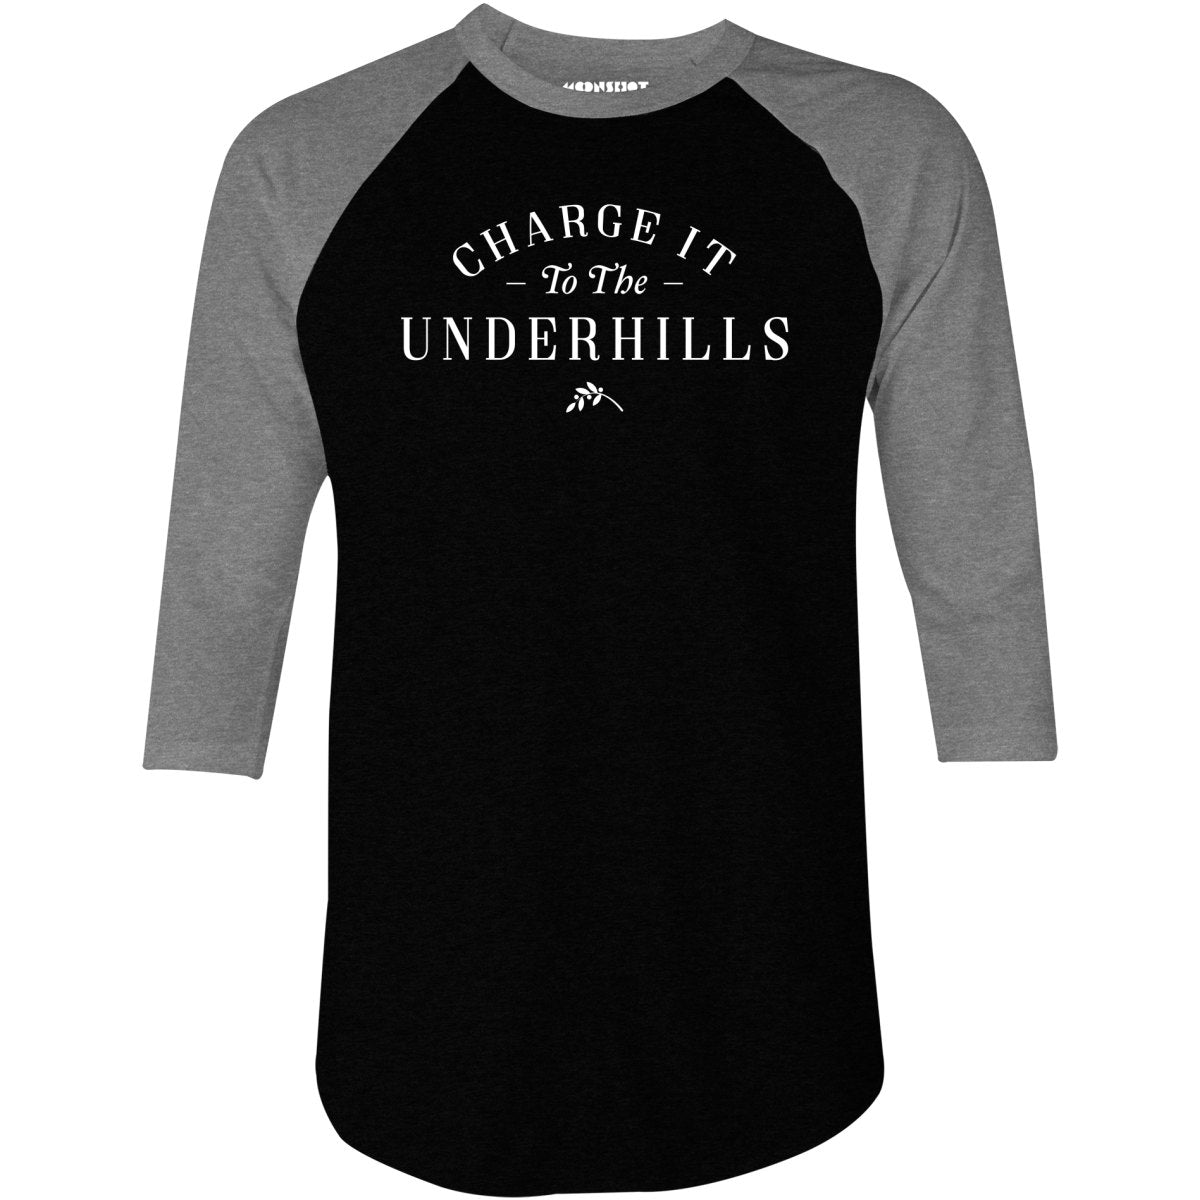 Charge it to the Underhills - 3/4 Sleeve Raglan T-Shirt